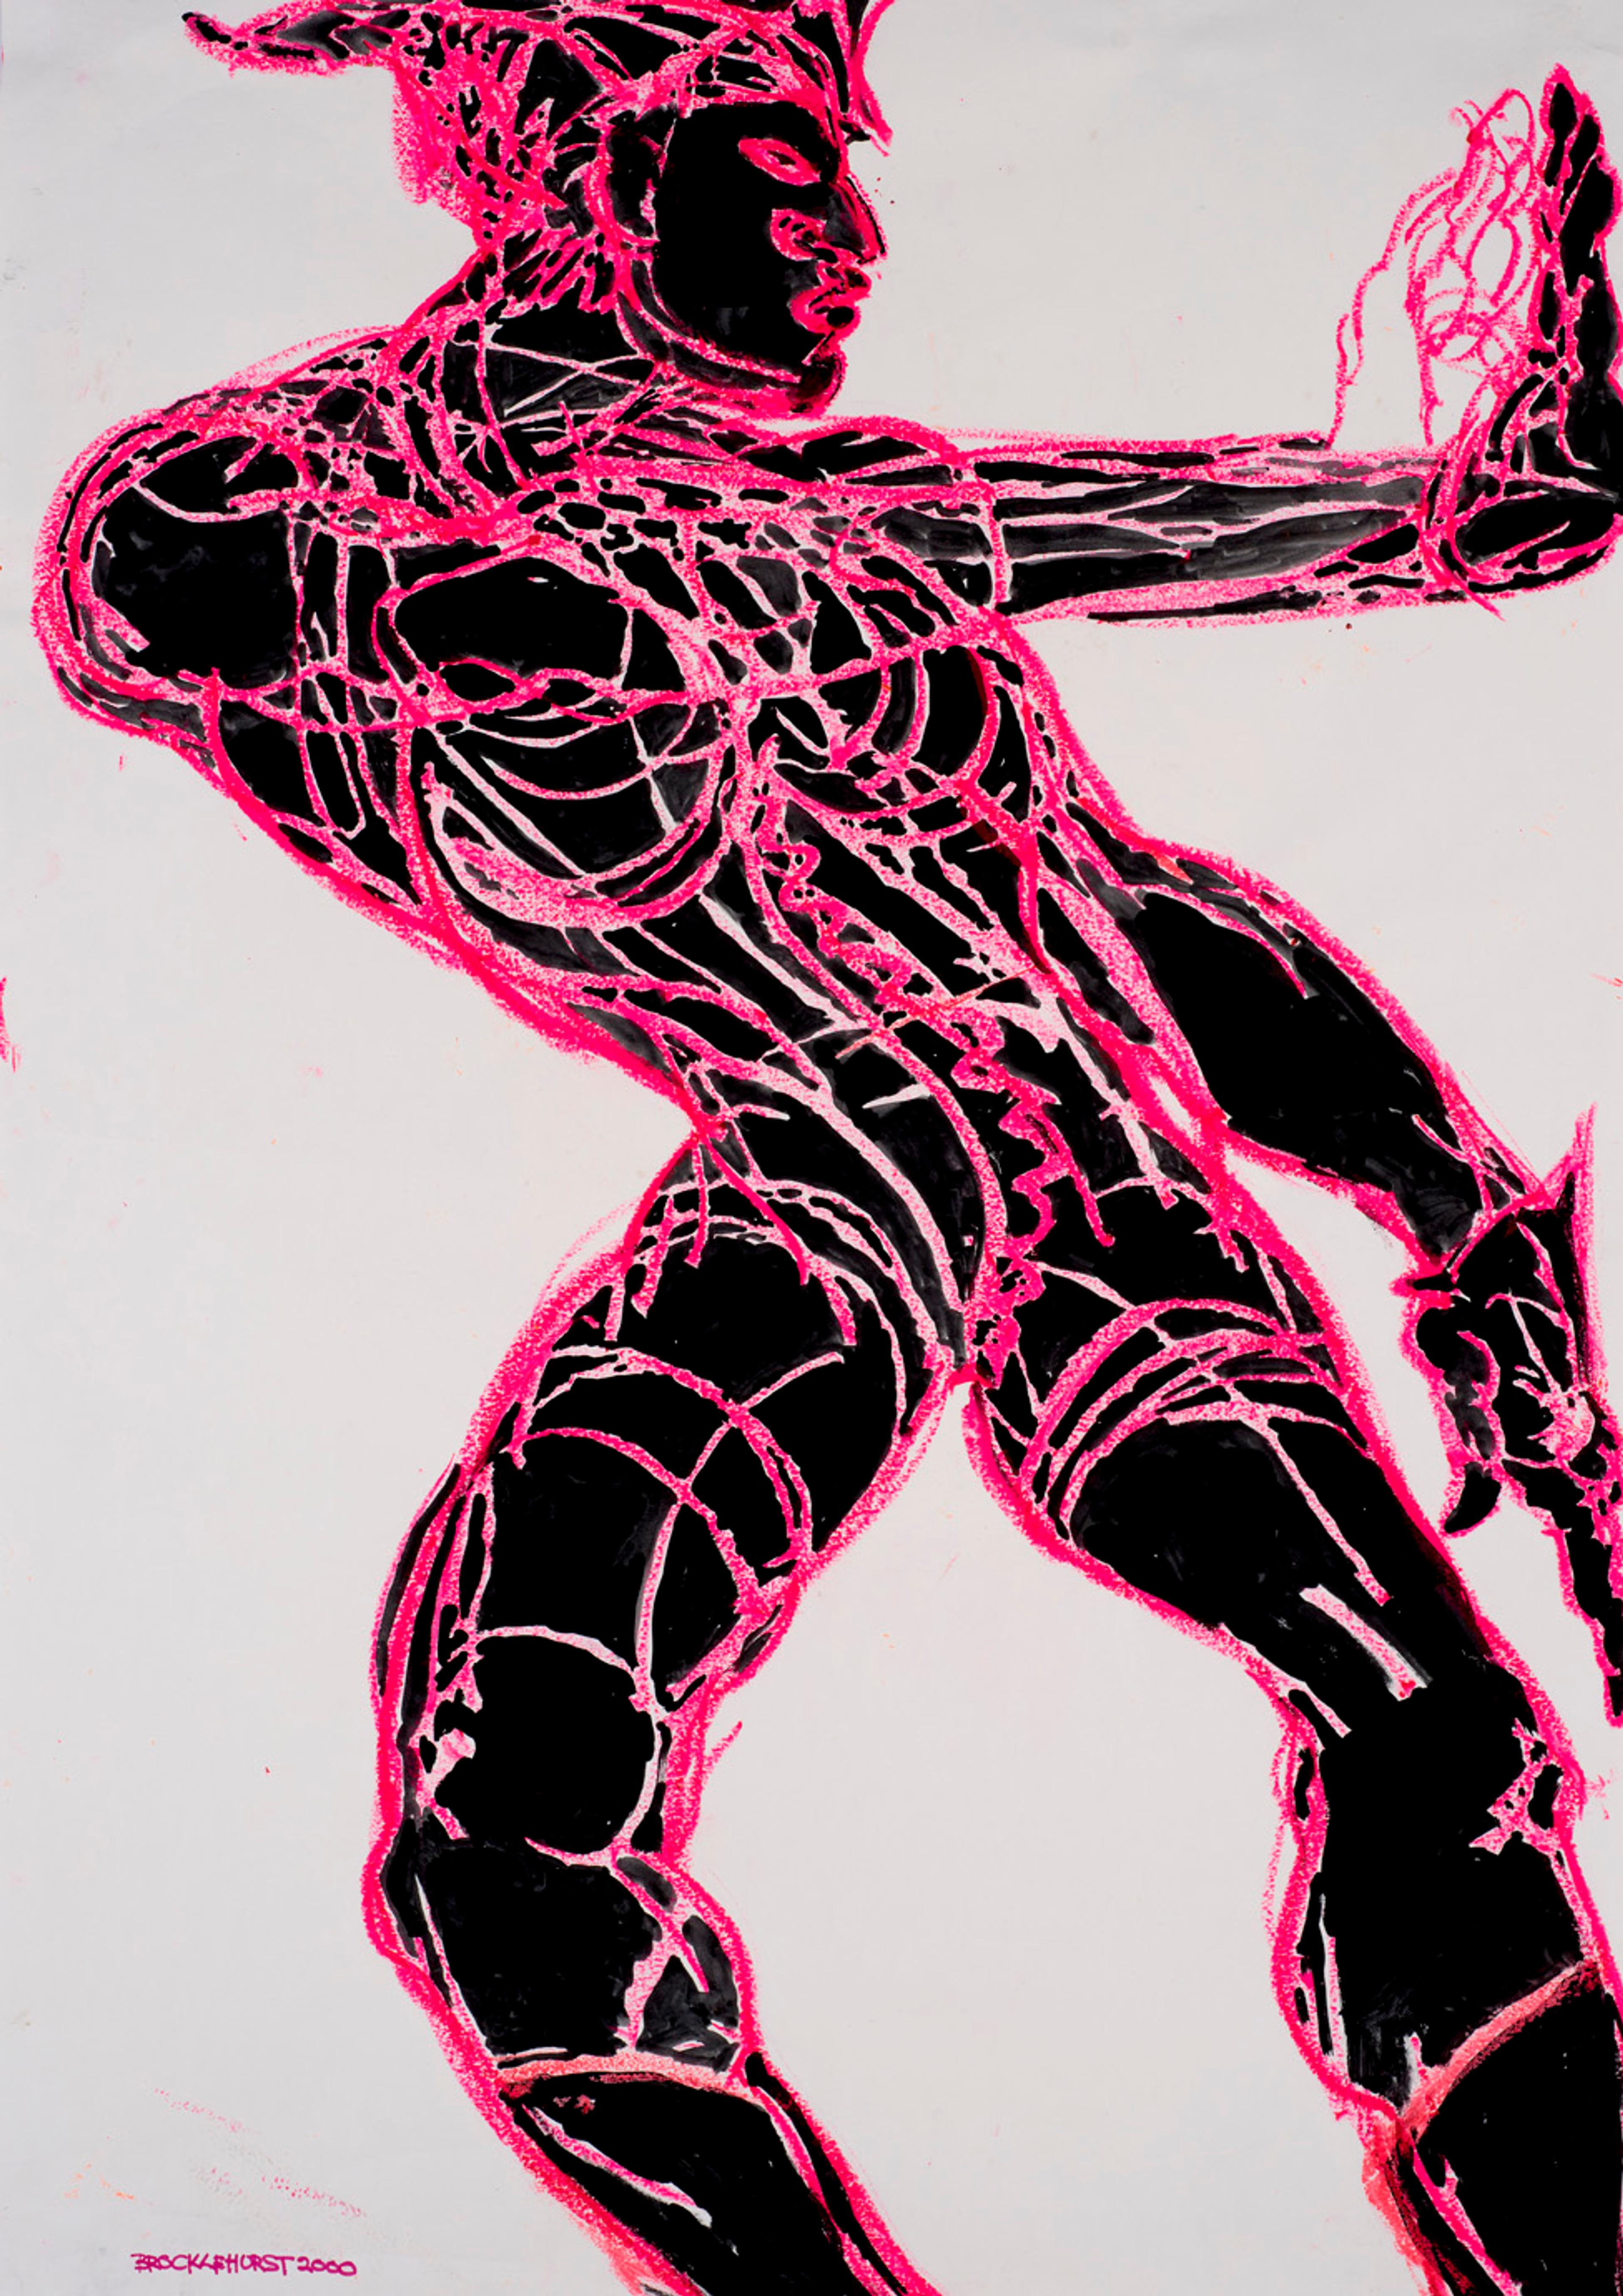 A drawing of a person dancing dressed in a black bodysuit, gloves, hat and boots. The whole figure is coloured black and drawn with pink lines on white paper.